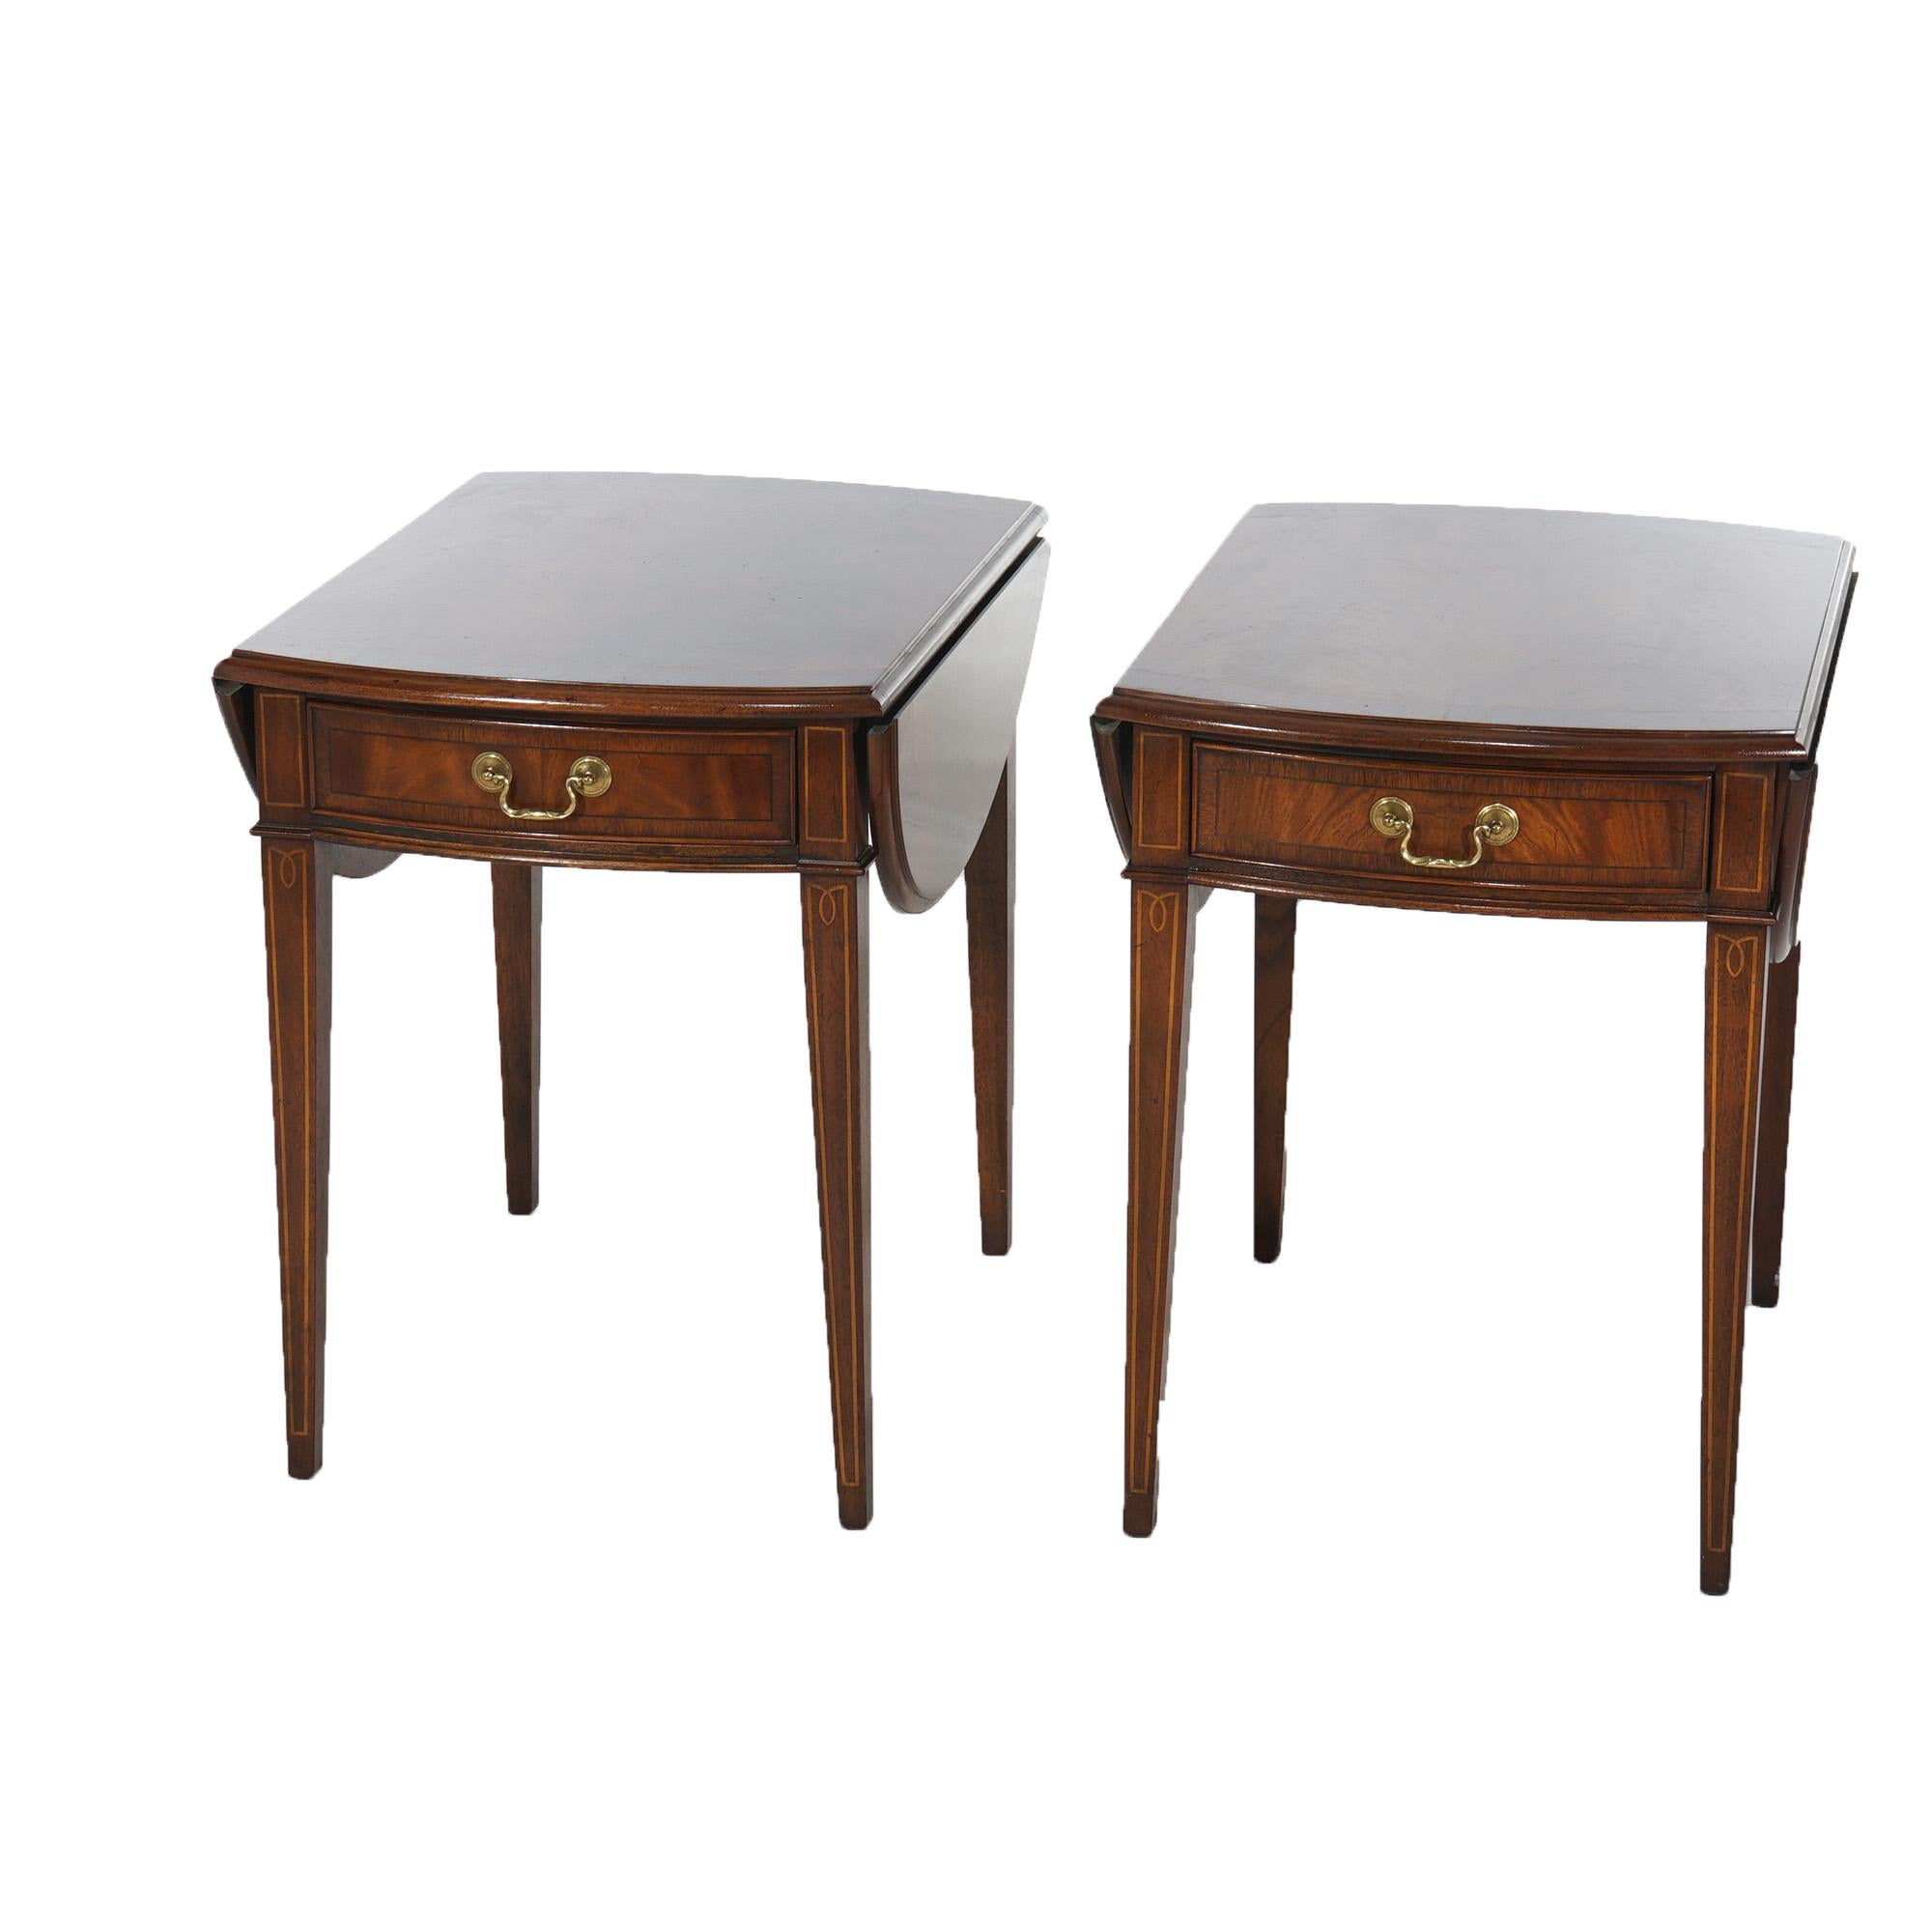 ***Ask About Reduced In-House Delivery Rates - Reliable Professional Service & Fully Insured***
Pair Hekman Pembroke Style Flame Mahogany Side Tables having Drop Leaf Top over Single Drawer Case and Raised on Tapered straight Legs, Made in Grand